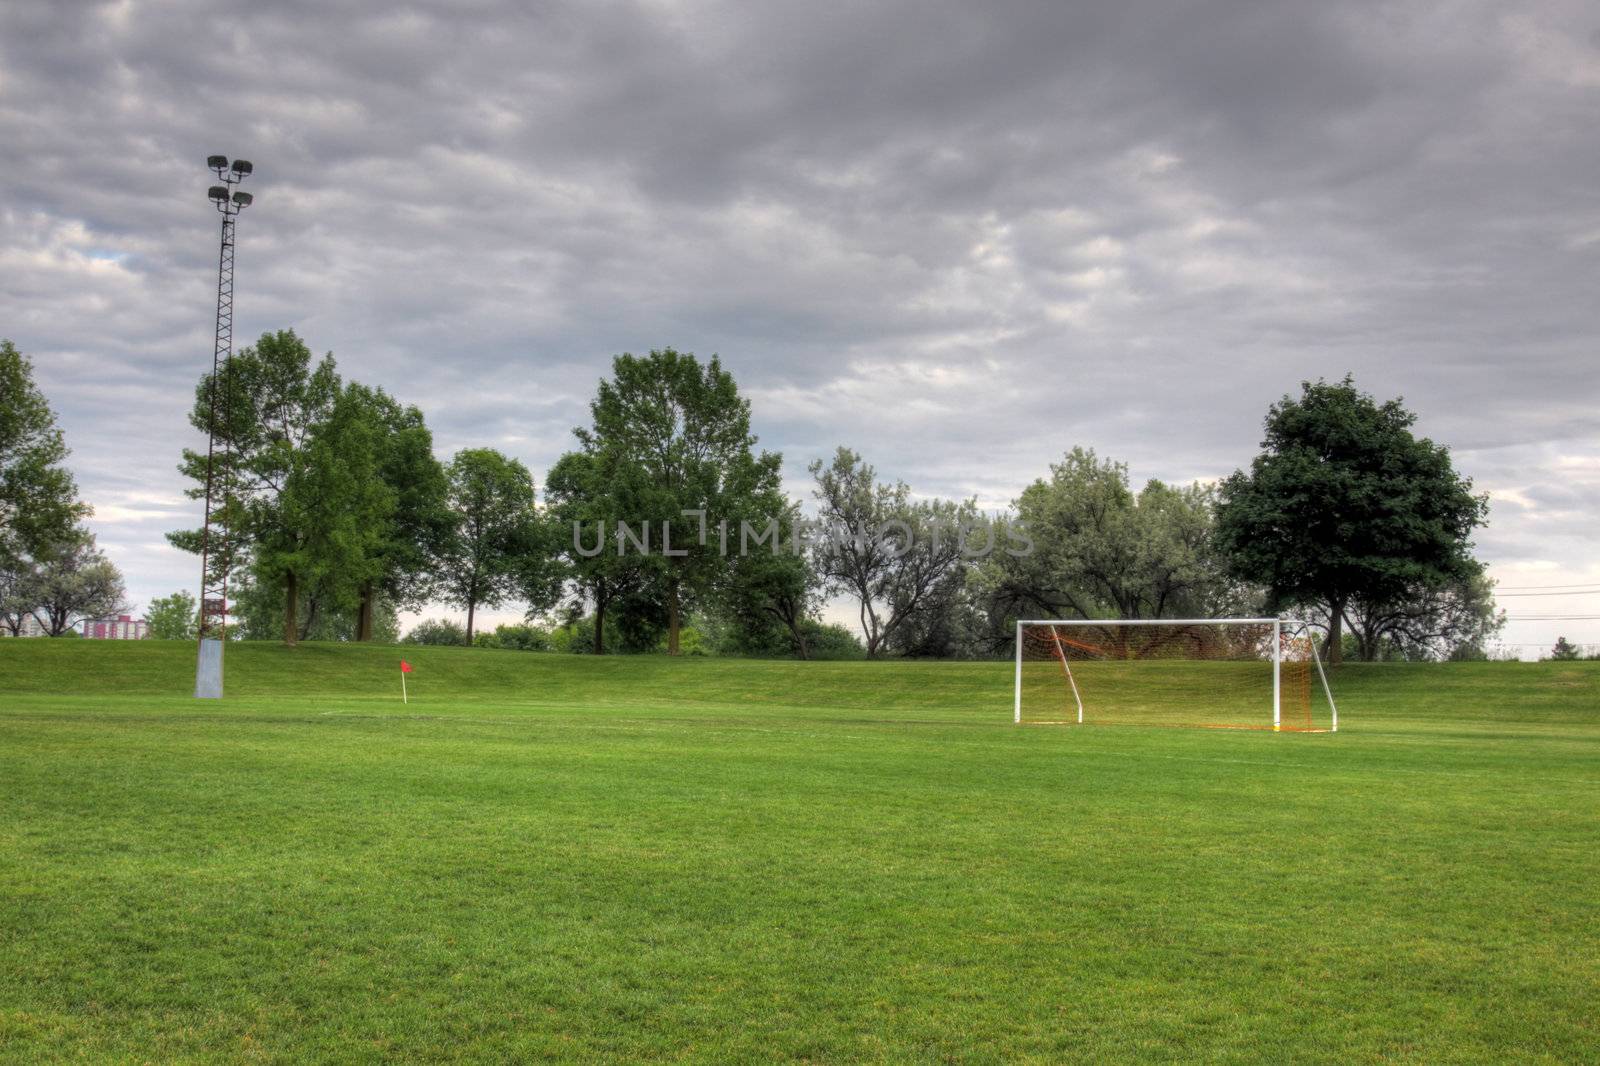 Cloudy Soccer Field
 by ca2hill